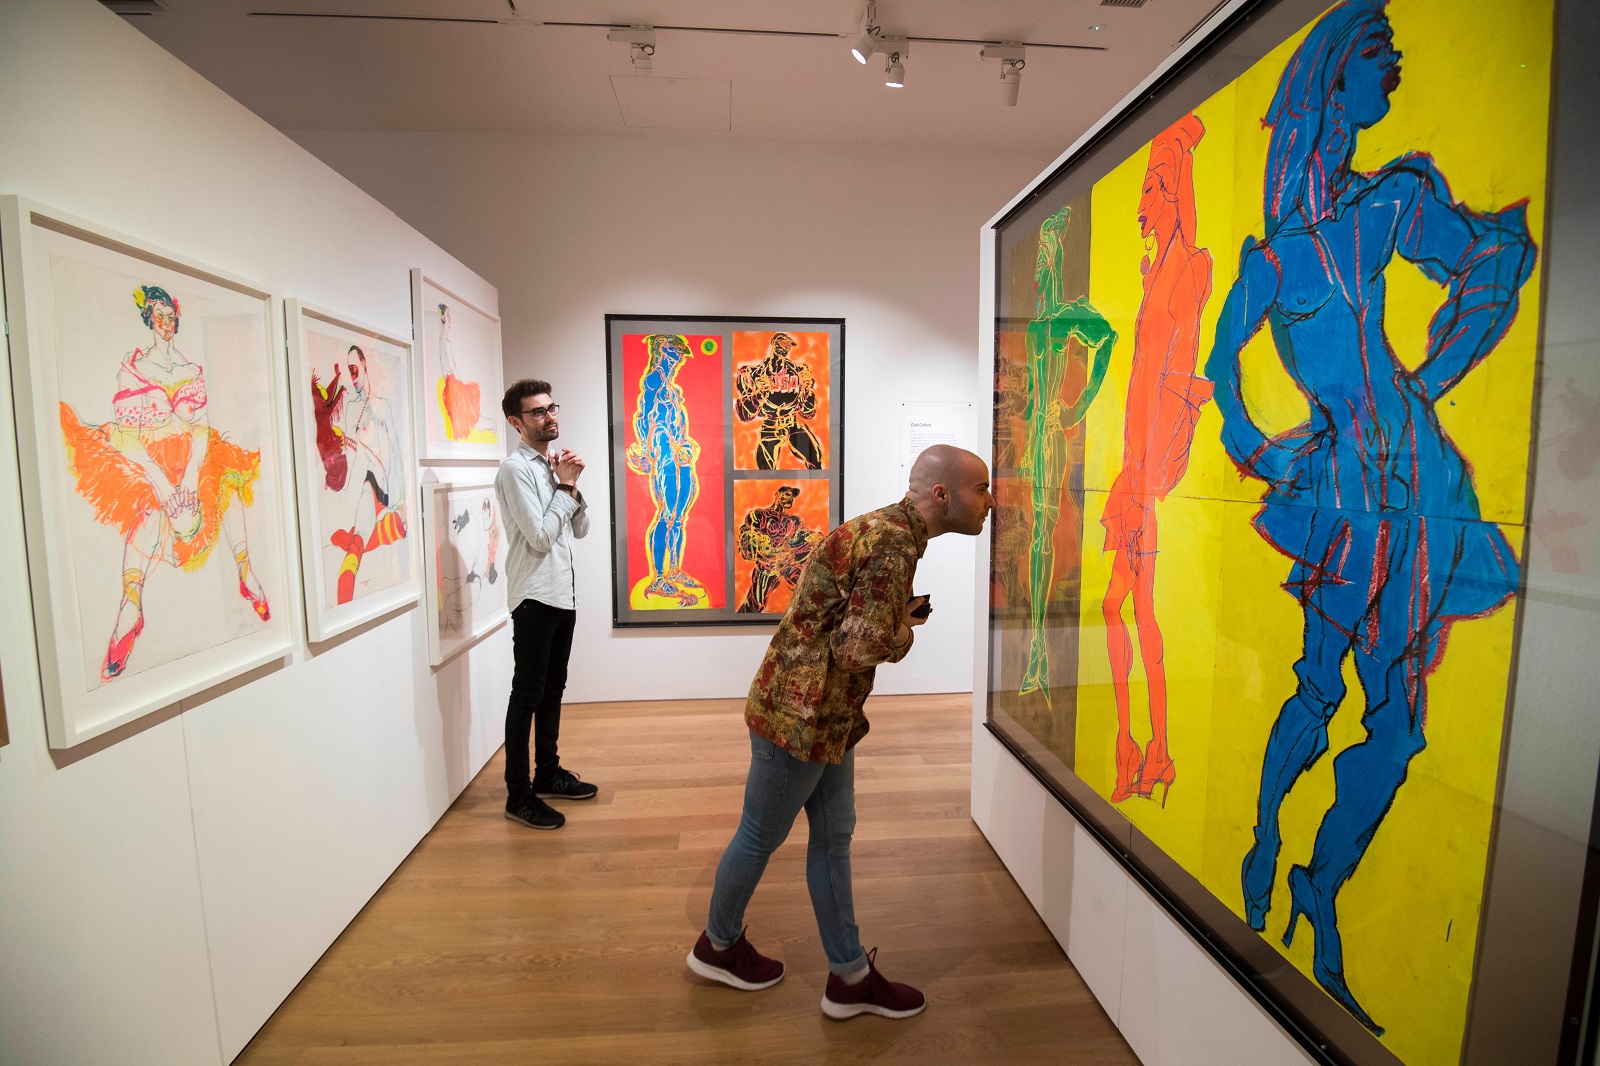 House of Illustration - One of the only art galleries in London dedicated to illustration